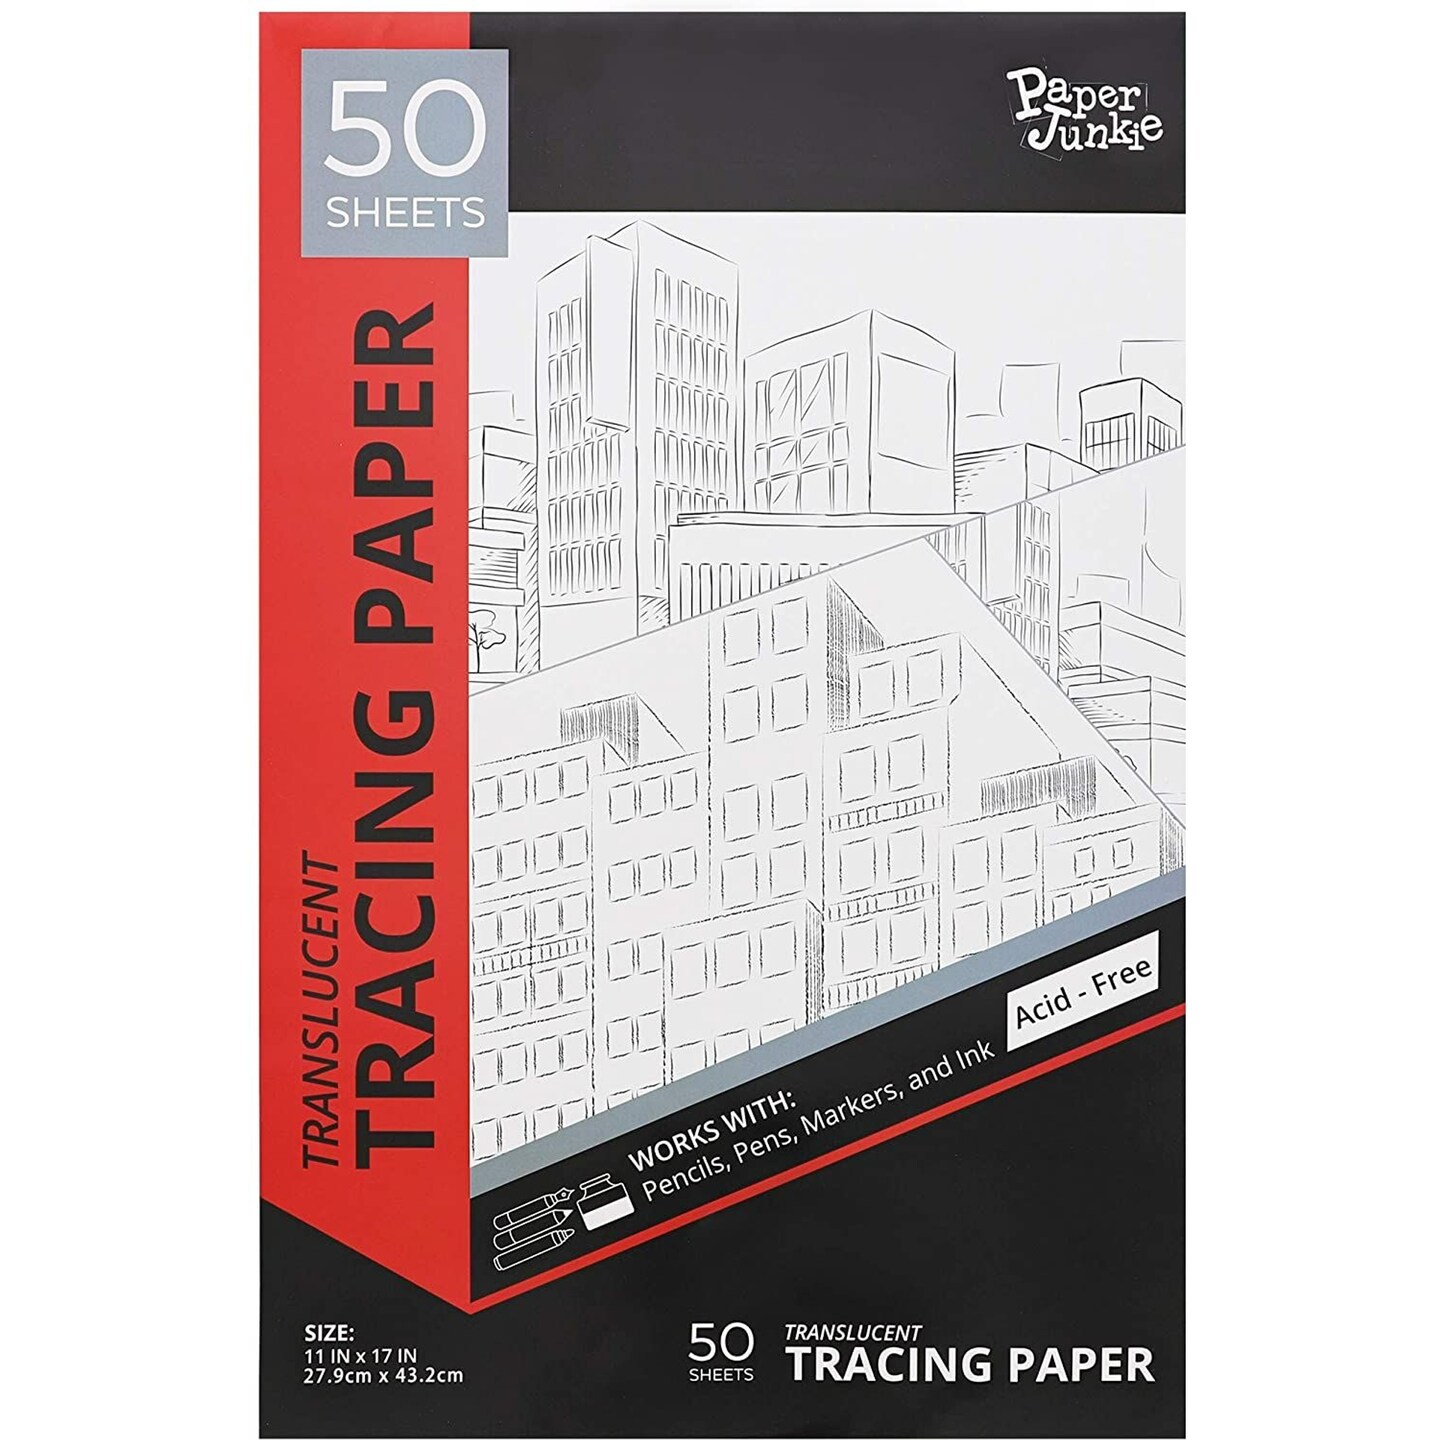 Tracing paper - YouTube